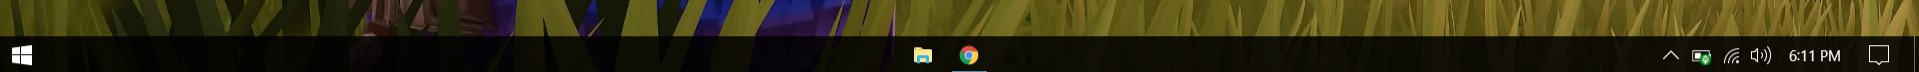 taskbar transparency difference on battery and while plugged in 693a9c5f-8113-47a0-babc-aac39eae888f?upload=true.jpg